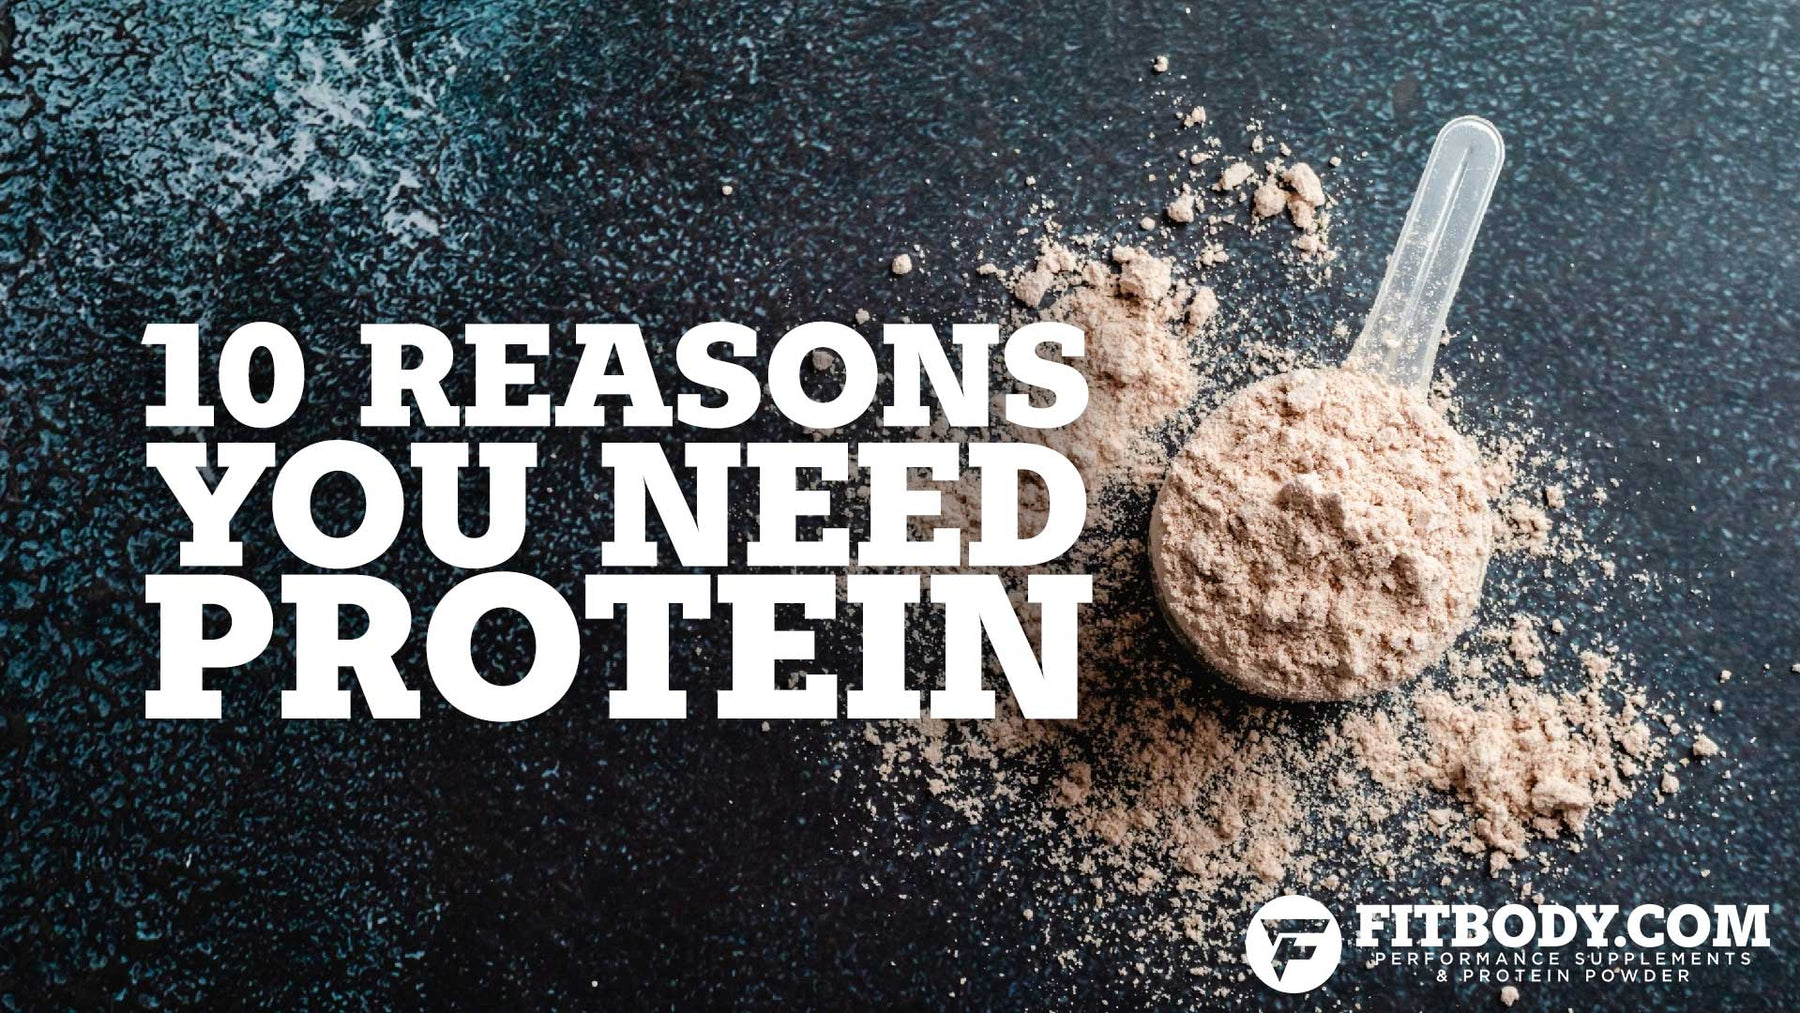 10 Reasons You Need Protein